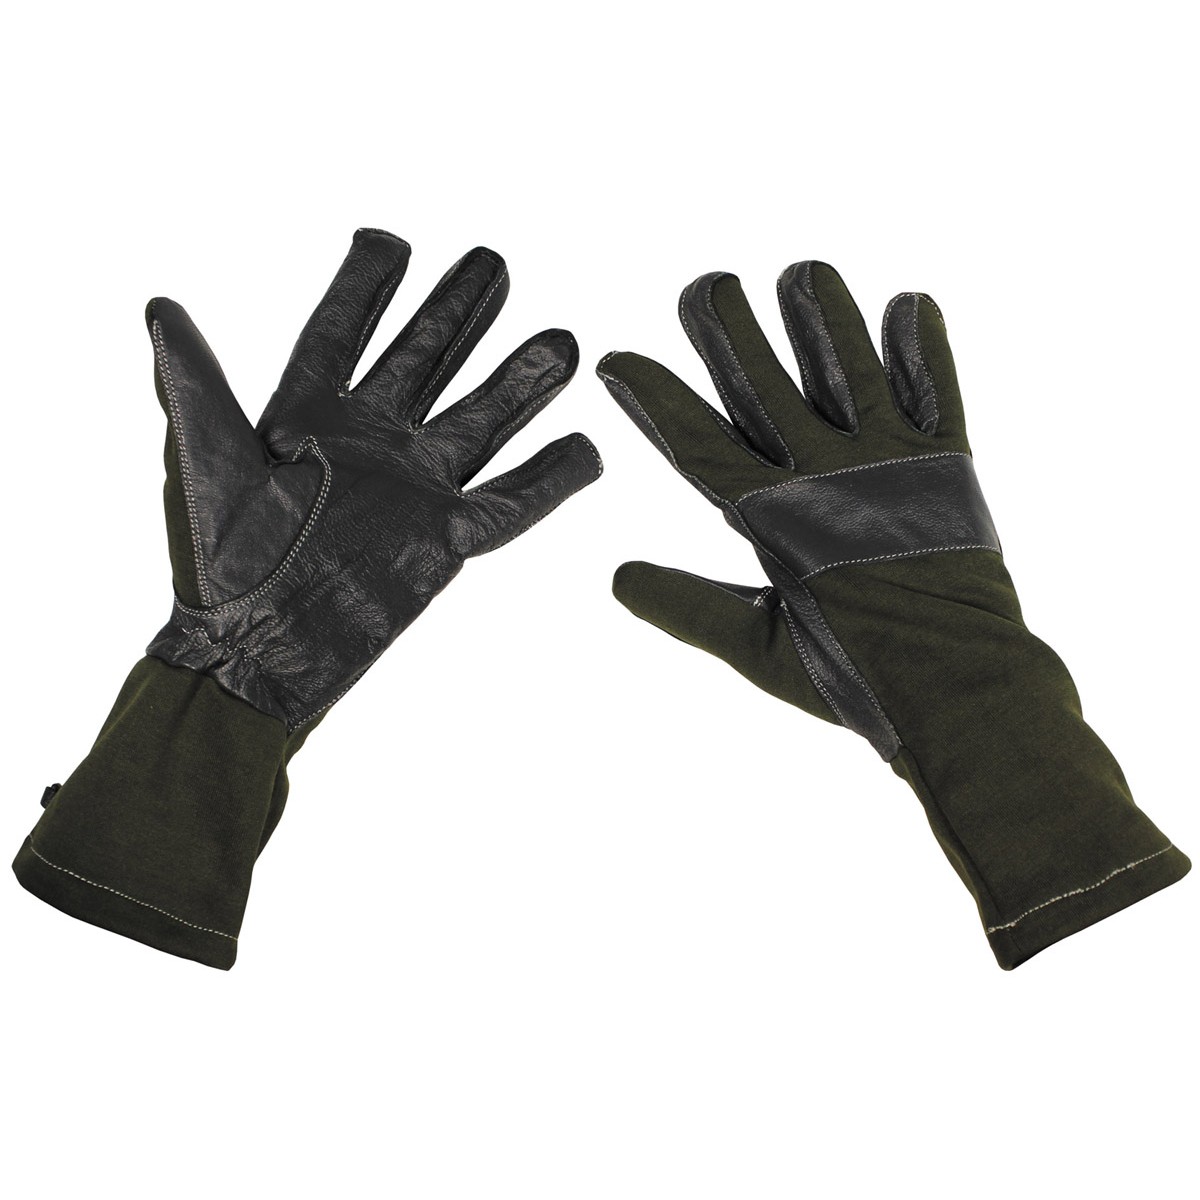 BW German Army Combat Gloves Long Gaiter Leather Trim - OD Green